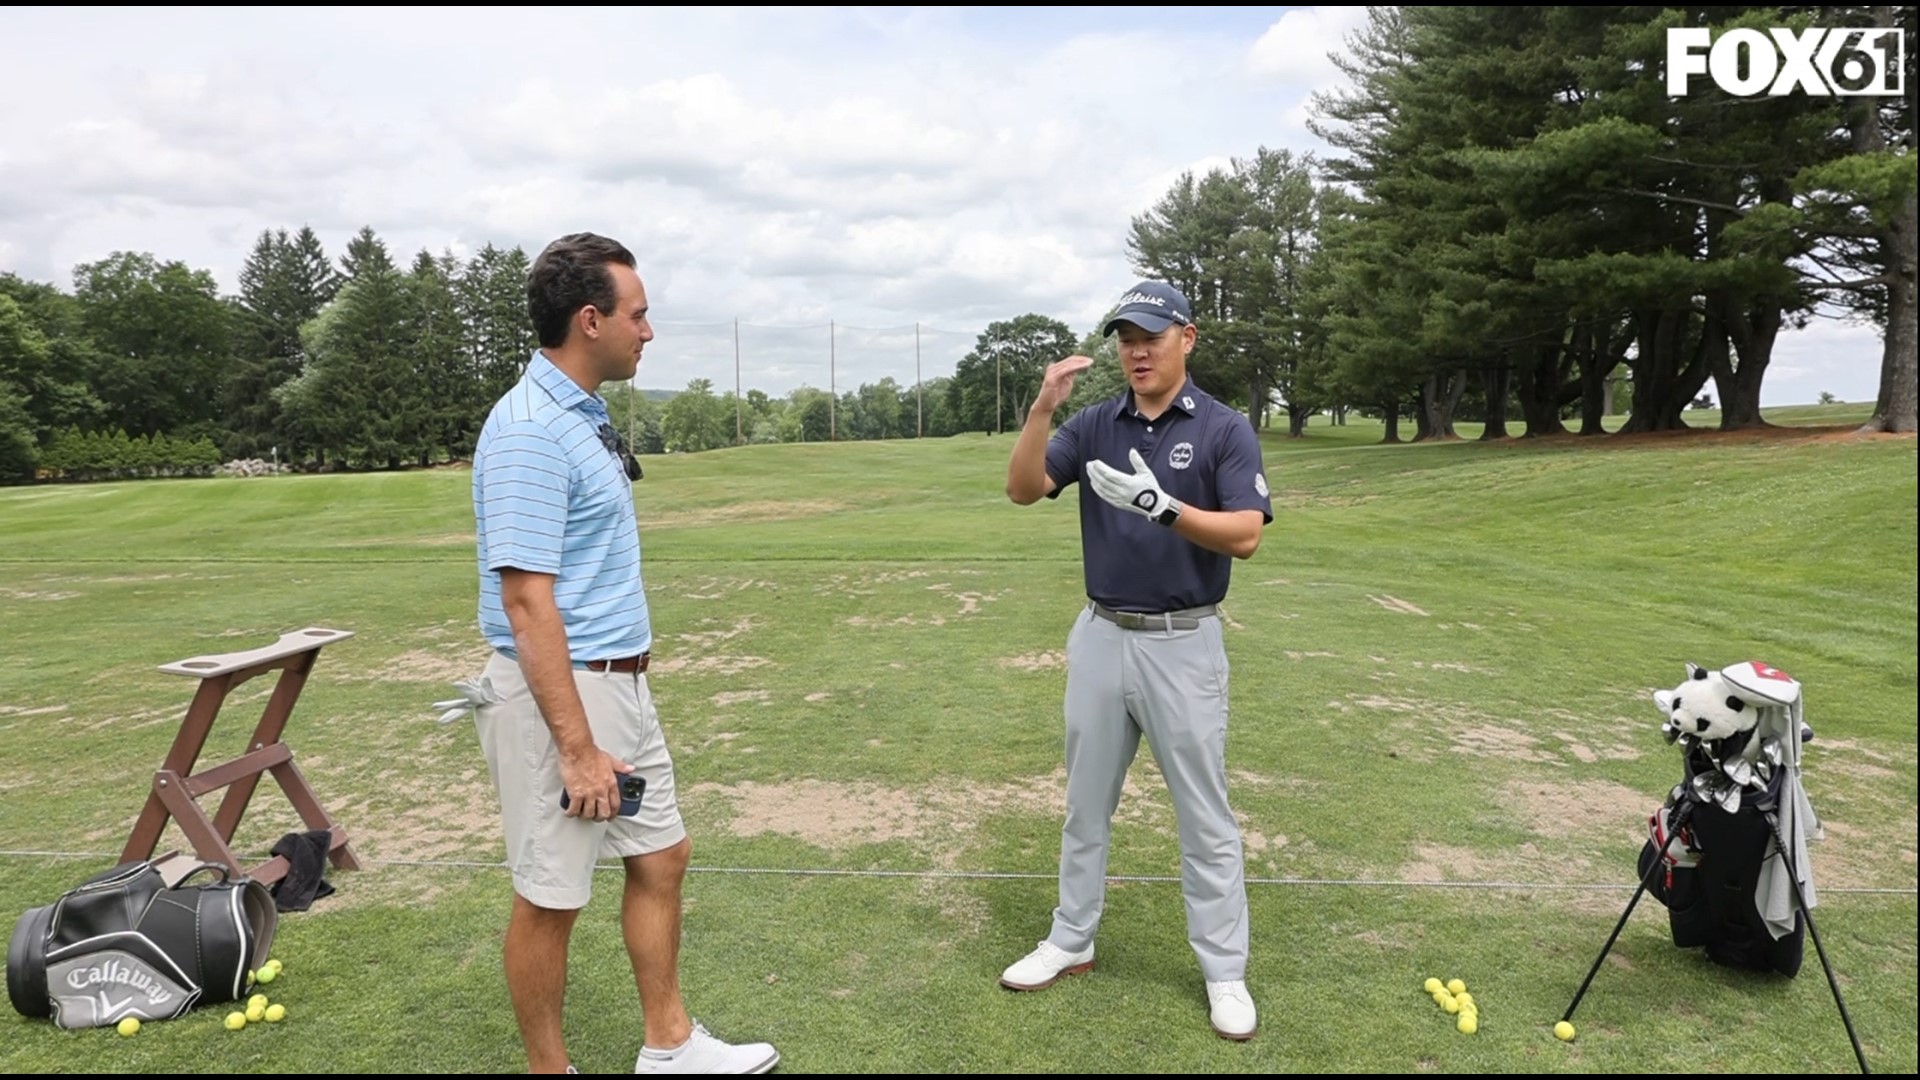 FOX61's Ben Goldman spoke with a golf pro at Tumble Brook Country Club to get all the information any newcomer to the sport would need.